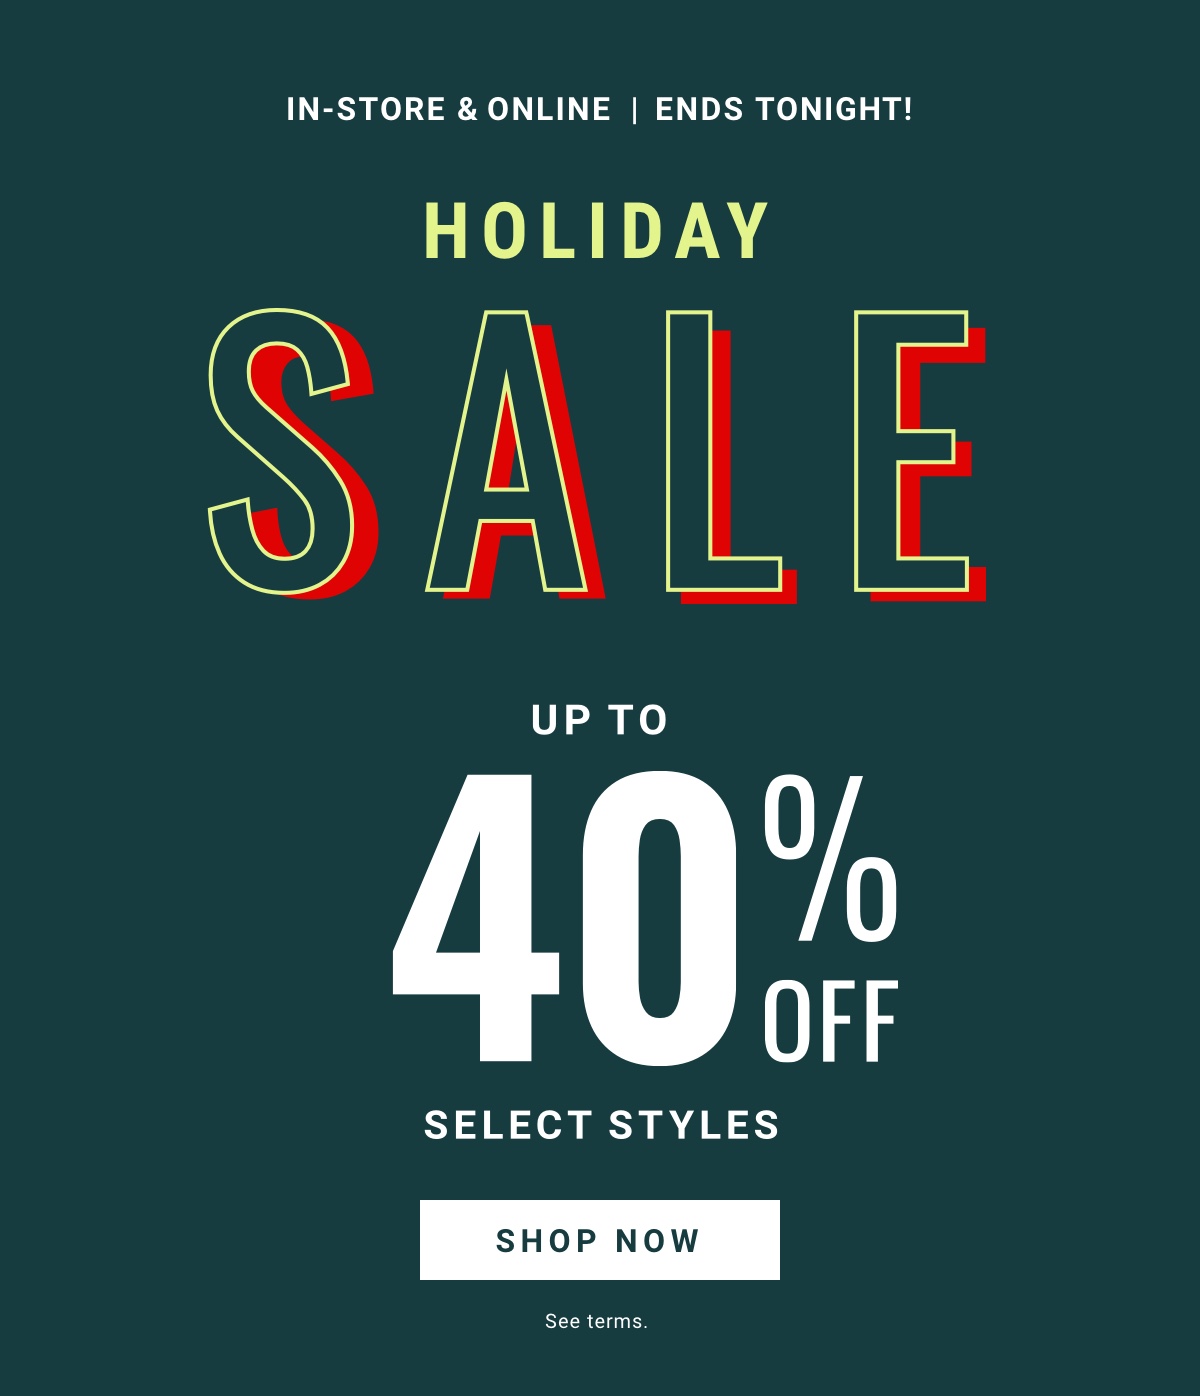 Holiday Sale Ends Tonight| Up to 40% Off Select Styles